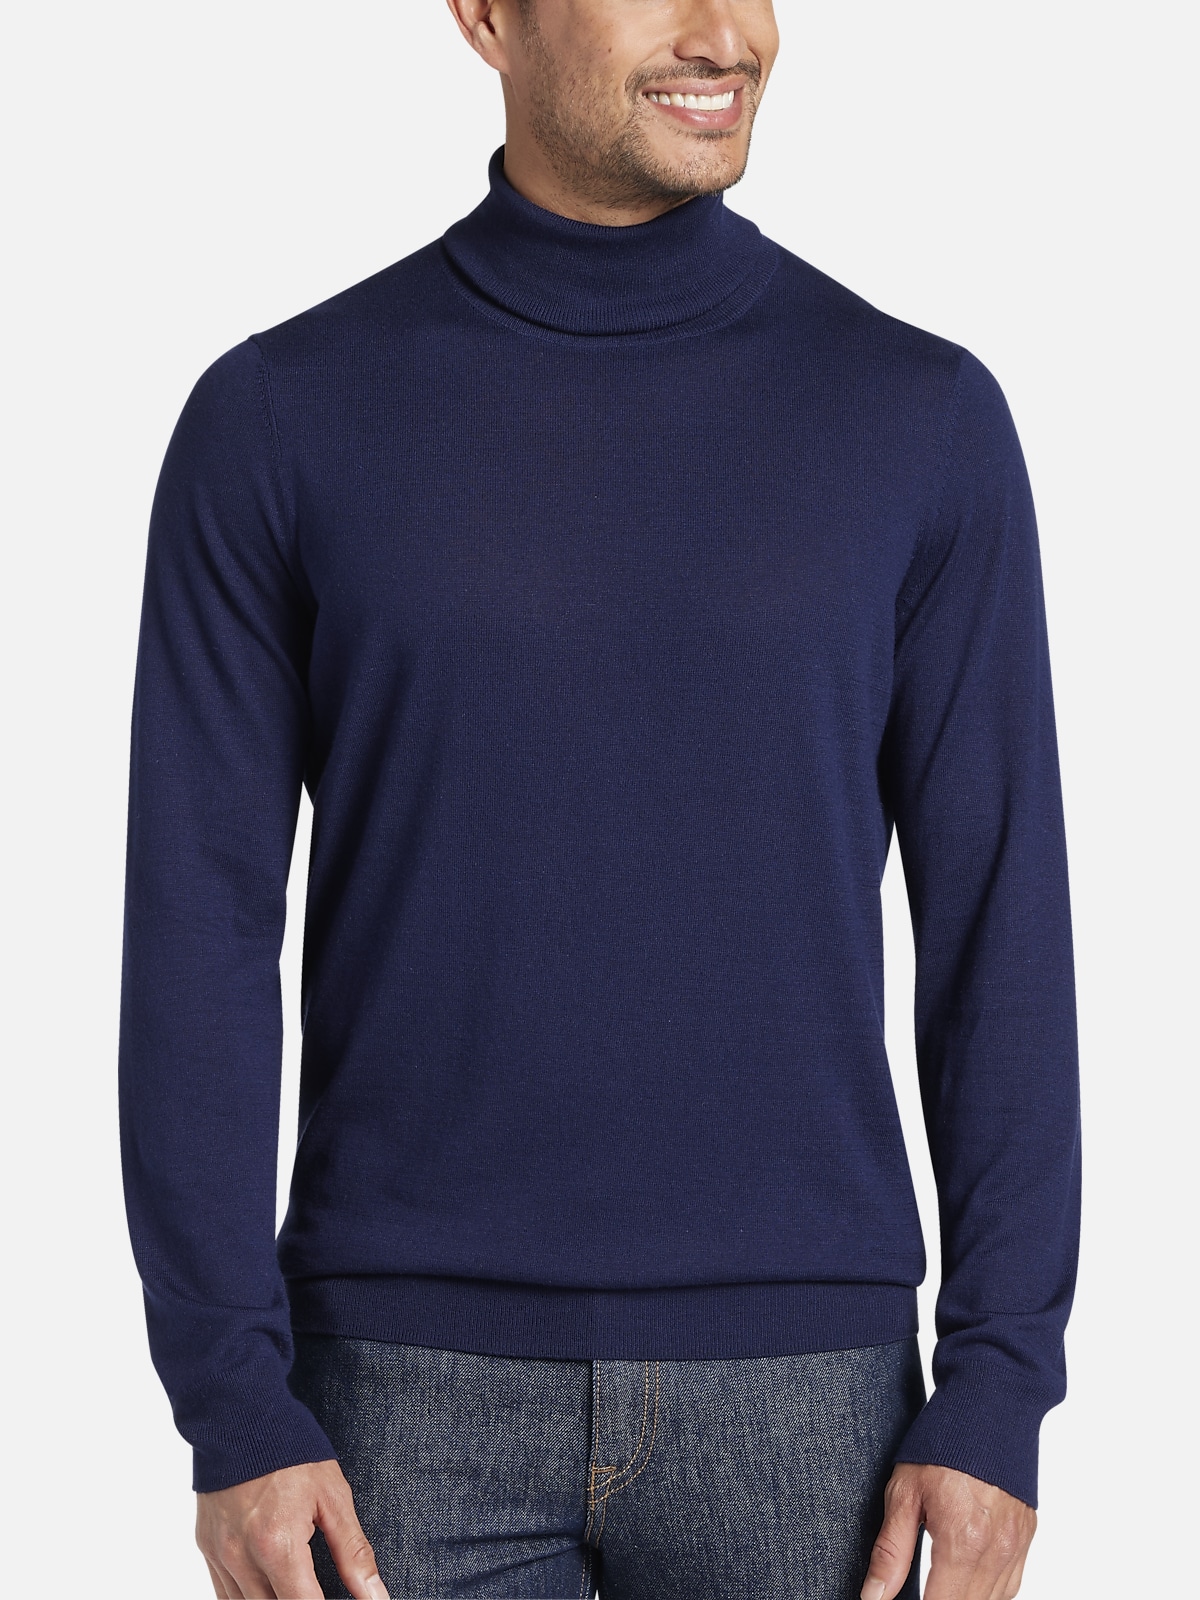 Michael Strahan Modern Fit Turtleneck Sweater | All Clearance $39.99 ...